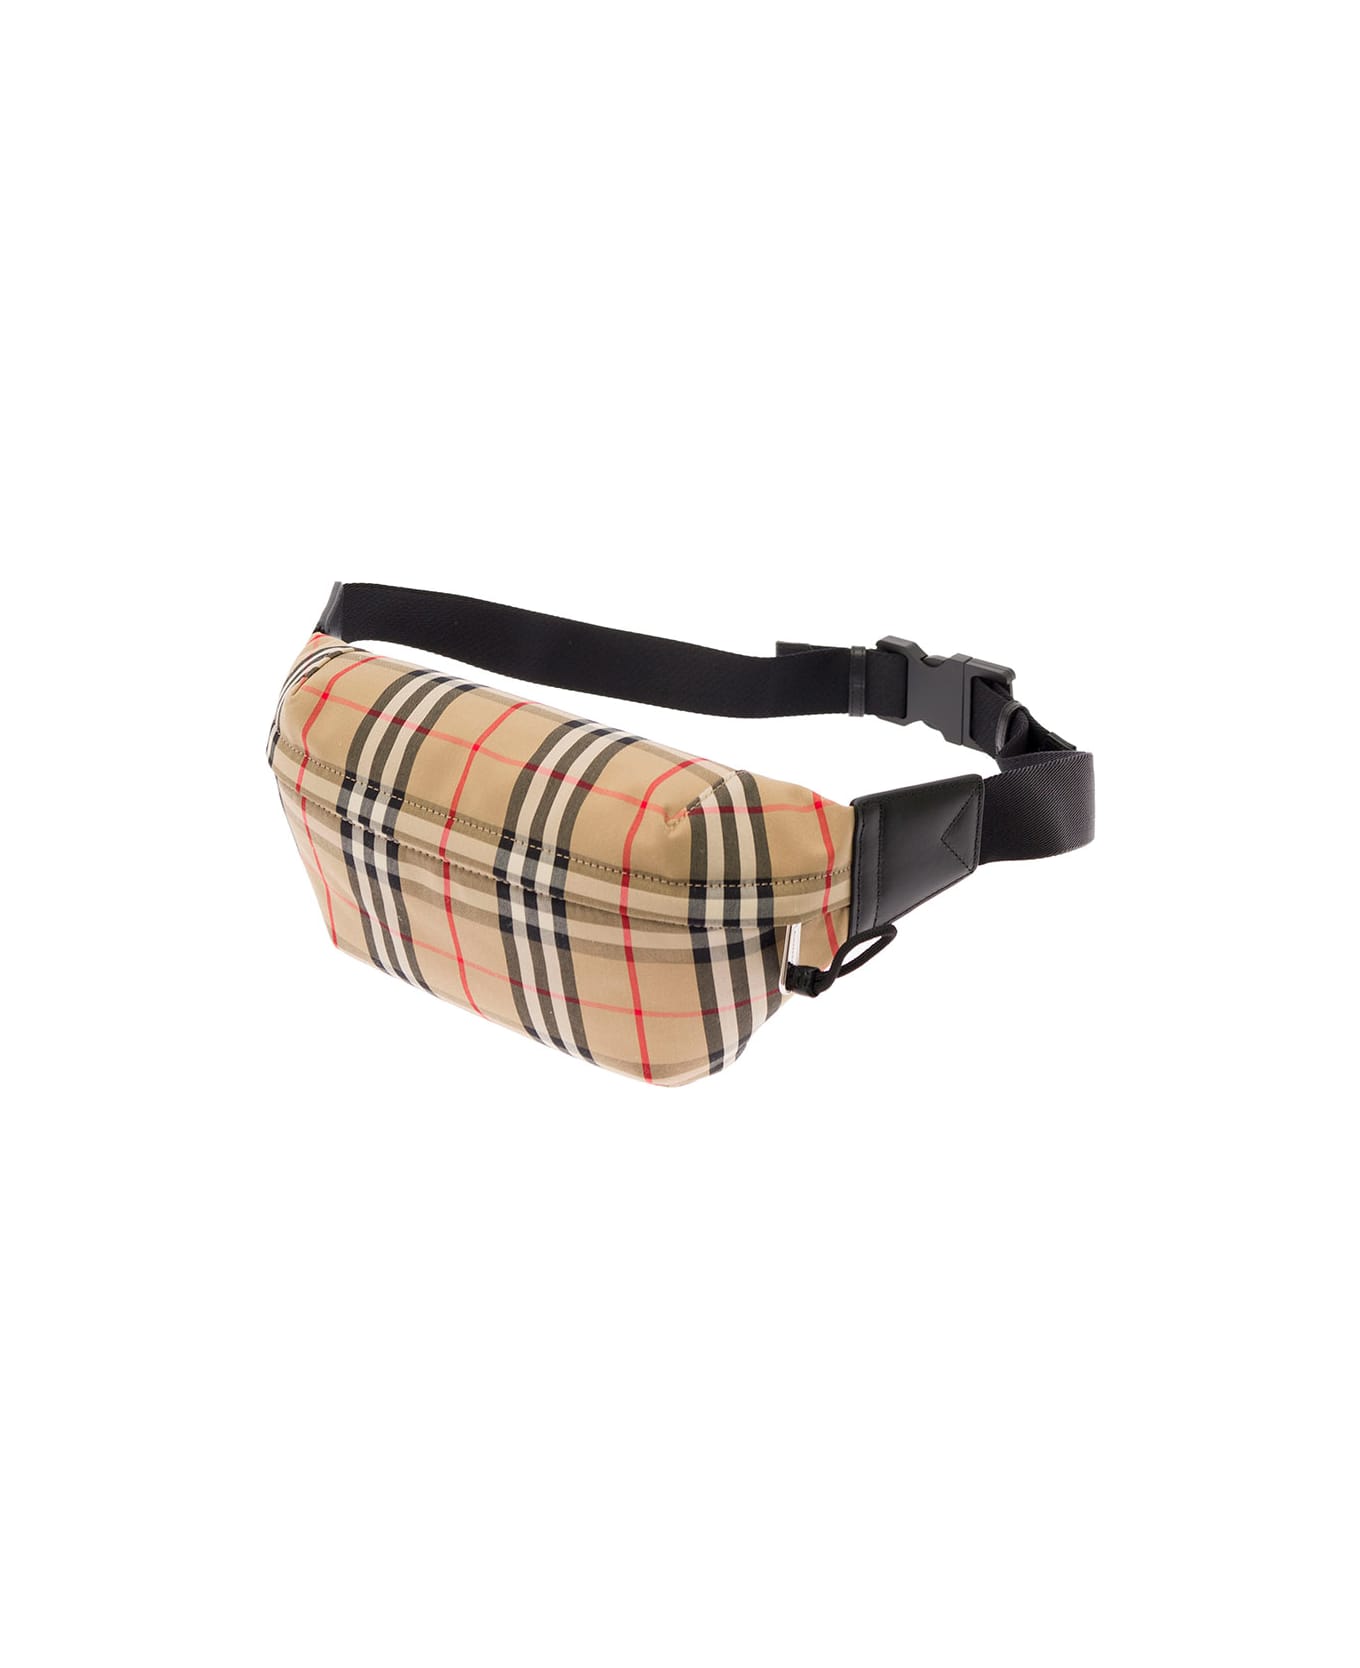 Burberry Sonny Beig Belt-bag In Tech Canvas With Vintage Check Pattern Burberry Man - Beige